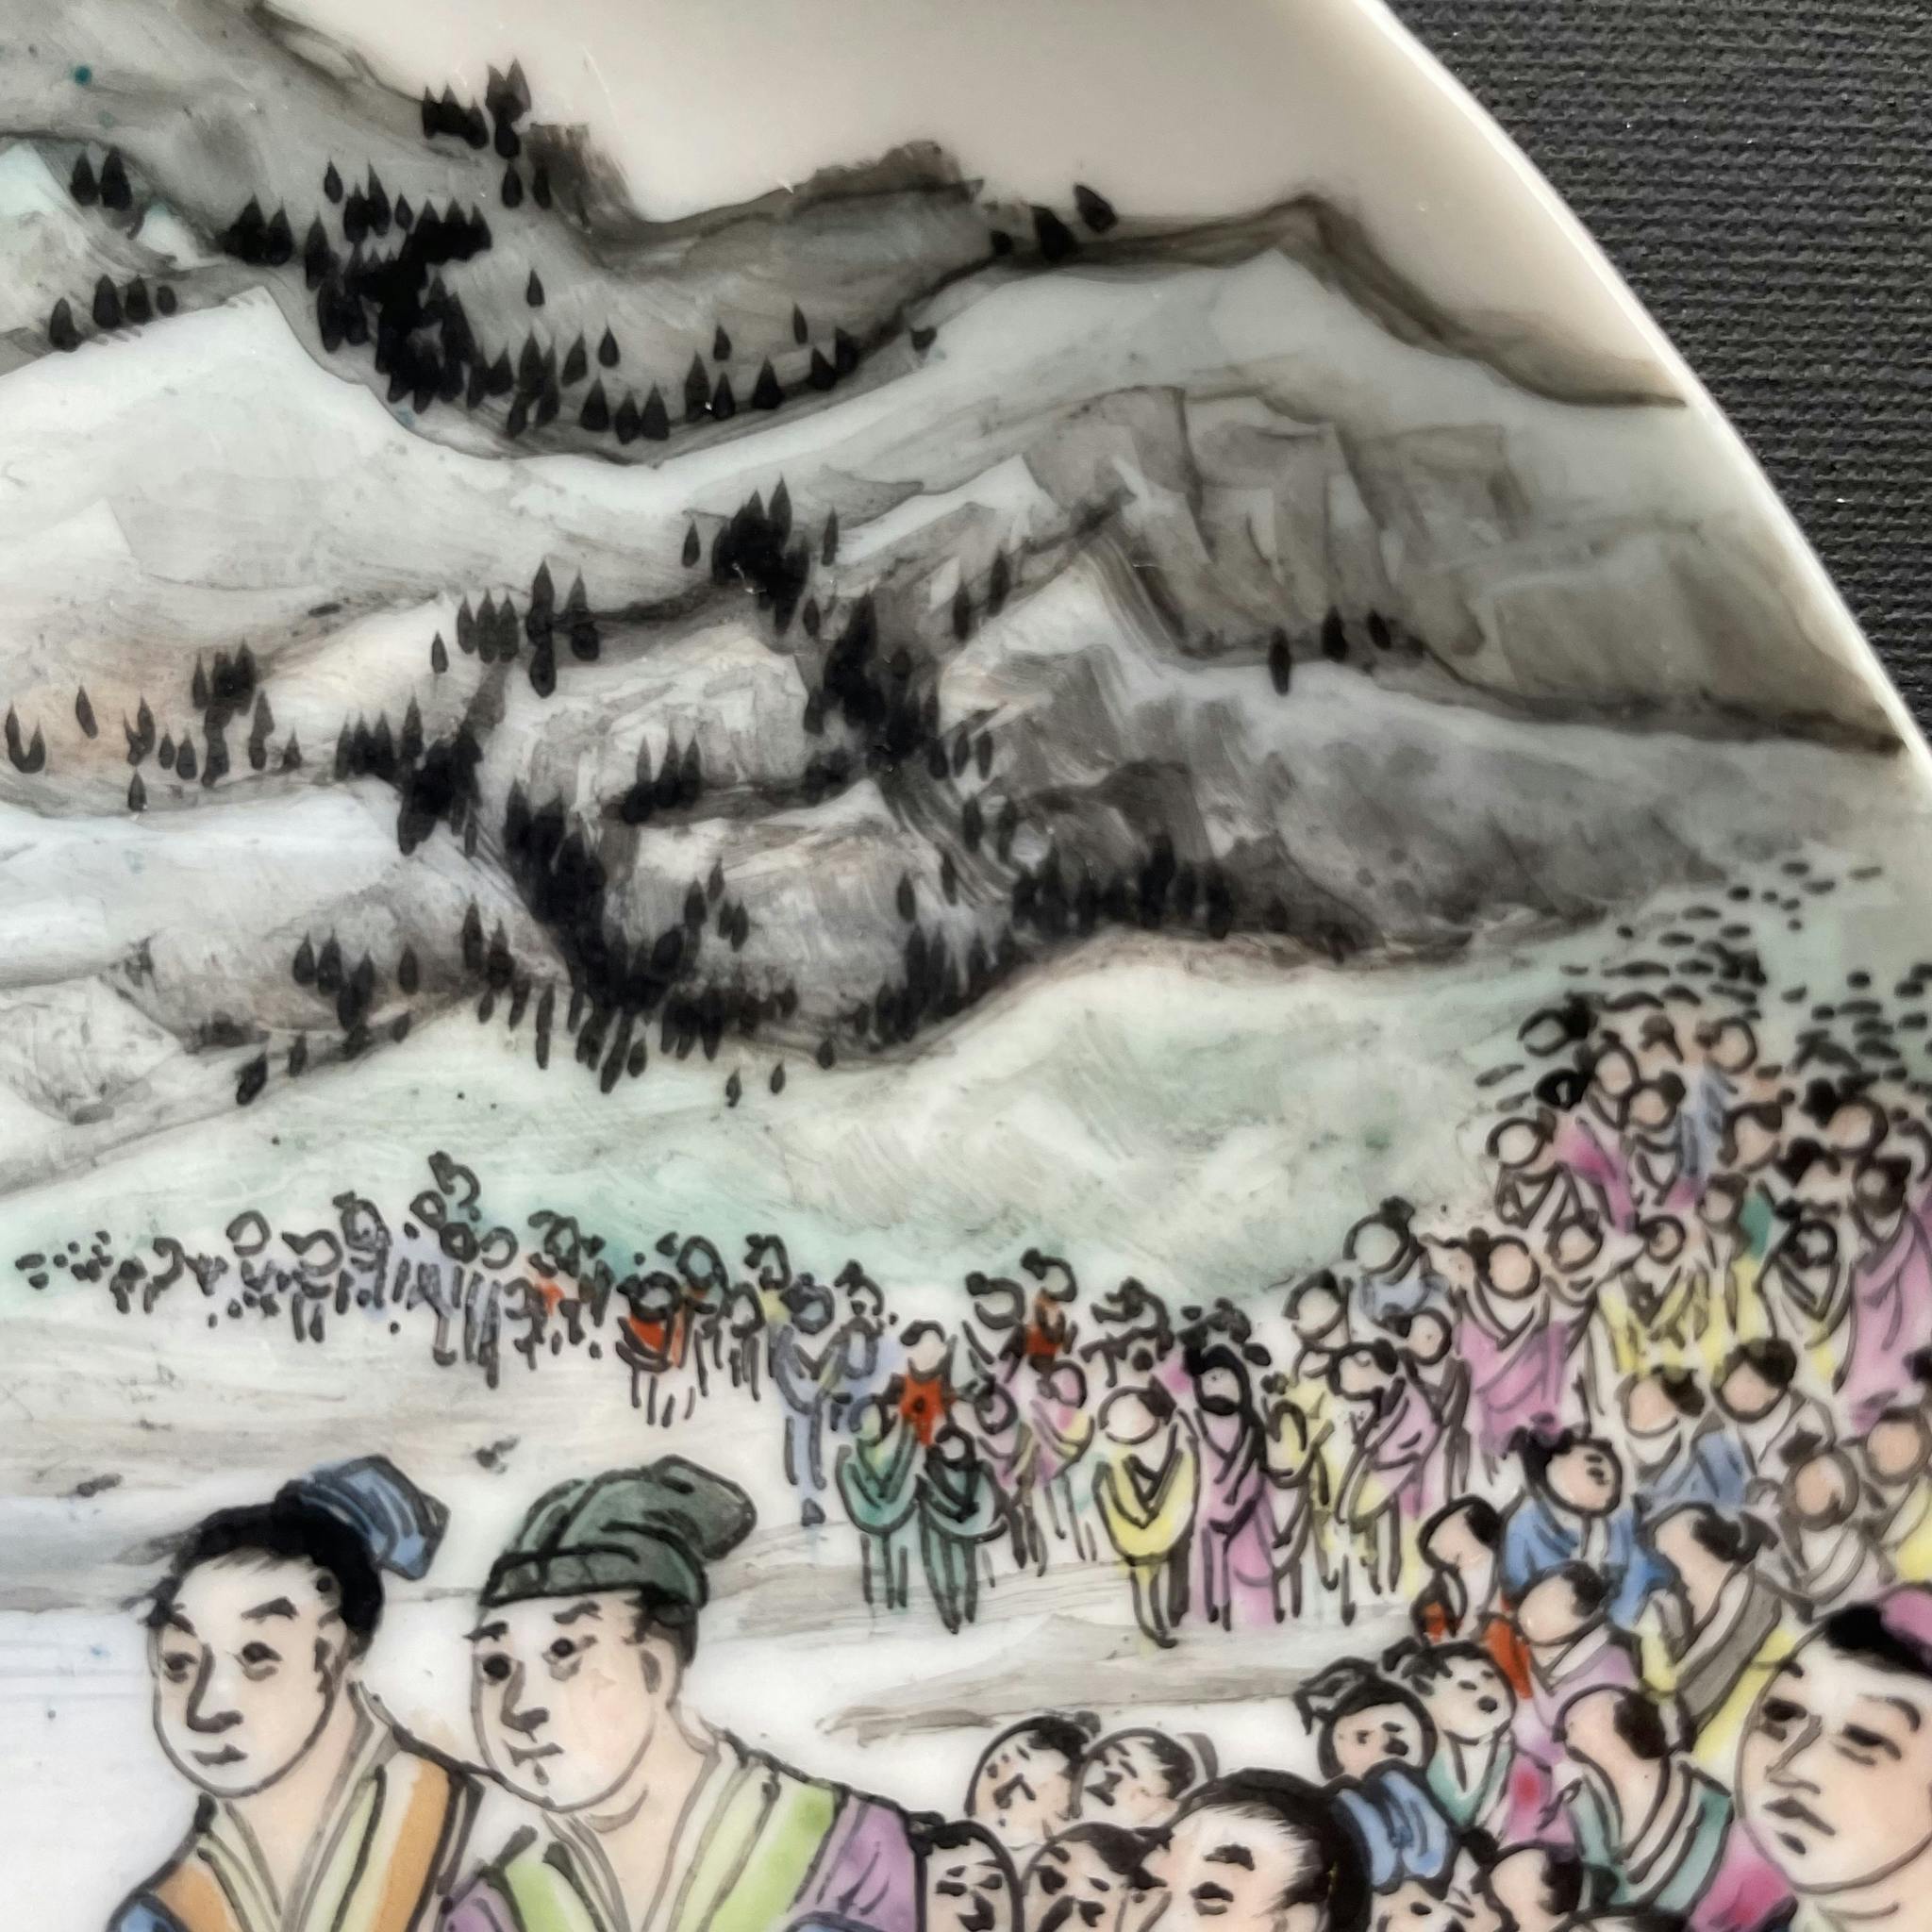 *Reserved for Tony* Vintage plate with bible motif from Tao Fong Shan 道风山 Hong Kong #1268